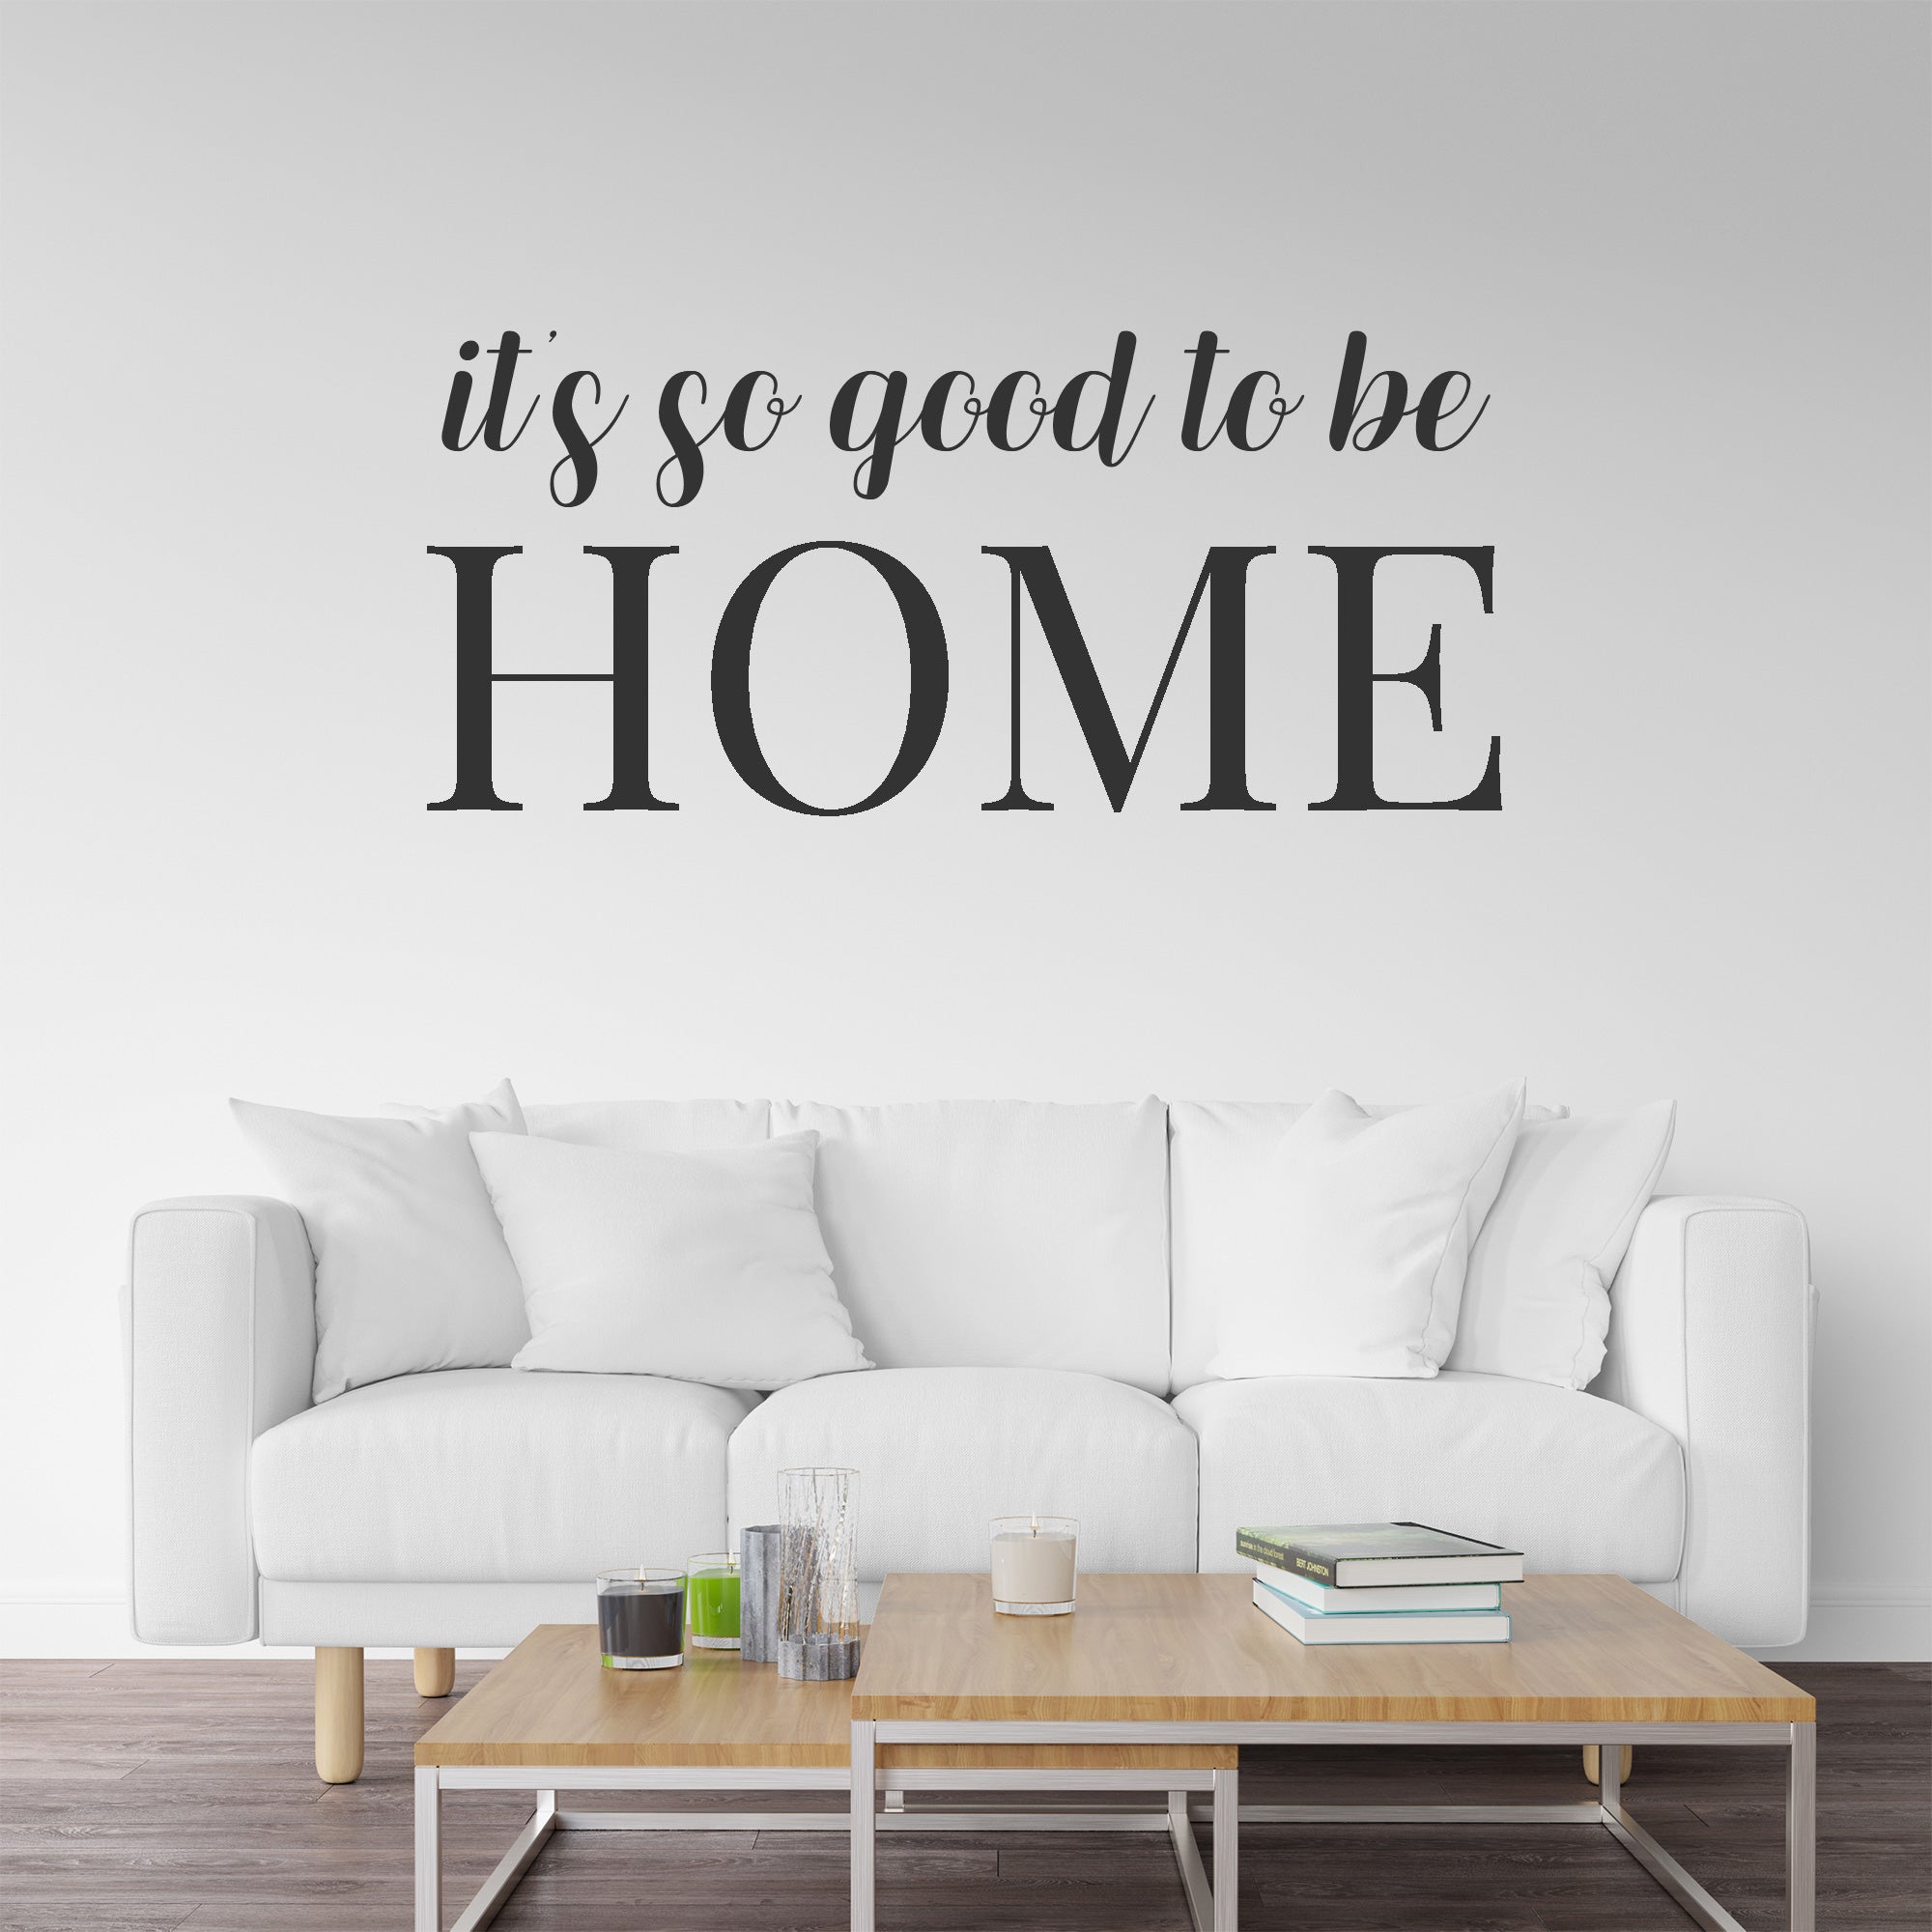 Custom Create Your Own Quote Personalized Wall-Vinyl Decals Stickers